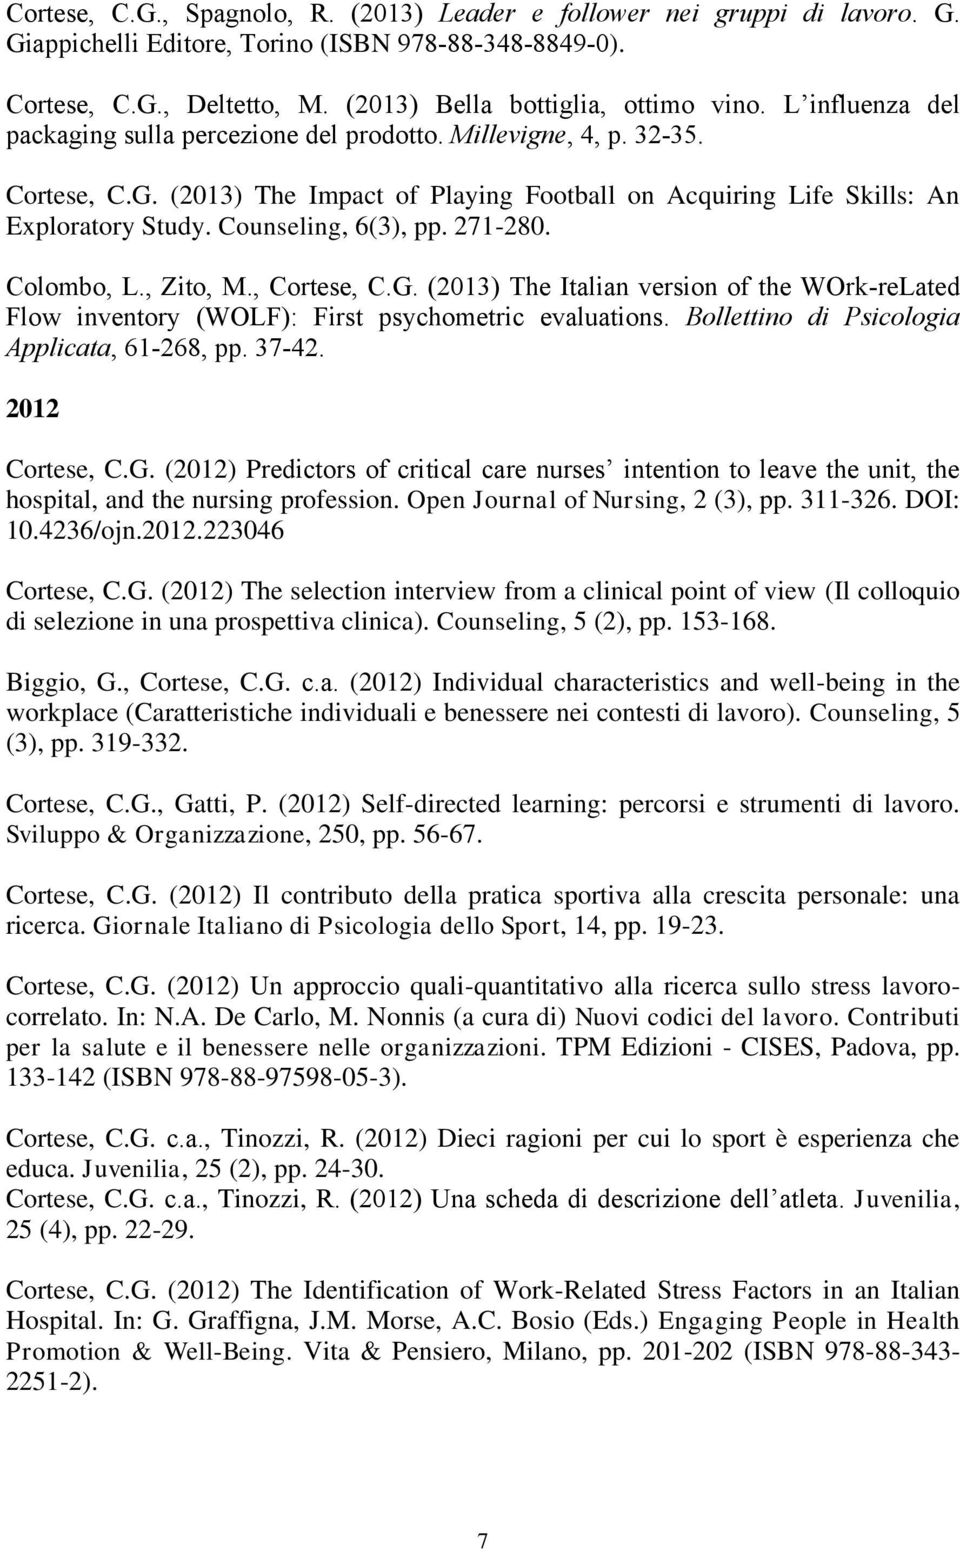 Counseling, 6(3), pp. 271-280. Colombo, L., Zito, M., Cortese, C.G. (2013) The Italian version of the WOrk-reLated Flow inventory (WOLF): First psychometric evaluations.